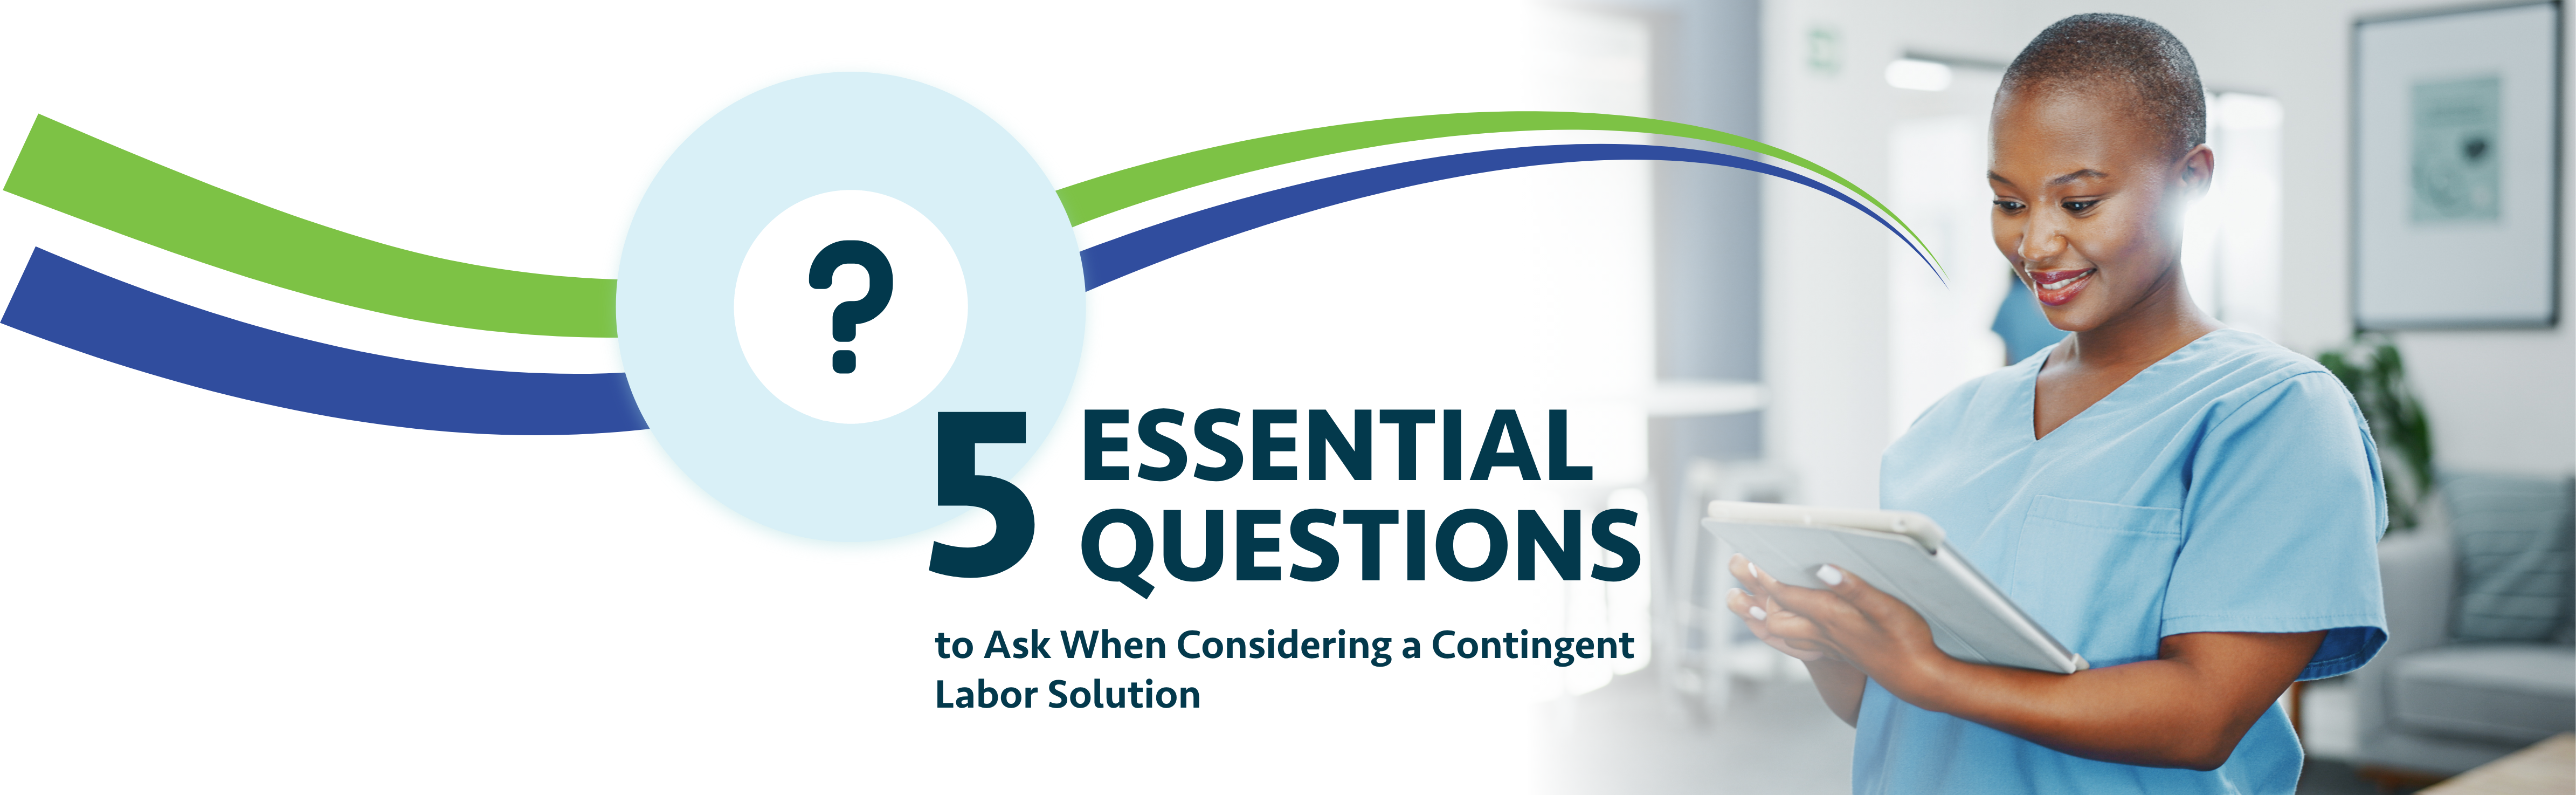 5 Essential Questions to Ask When Considering a Contingent Labor Solution